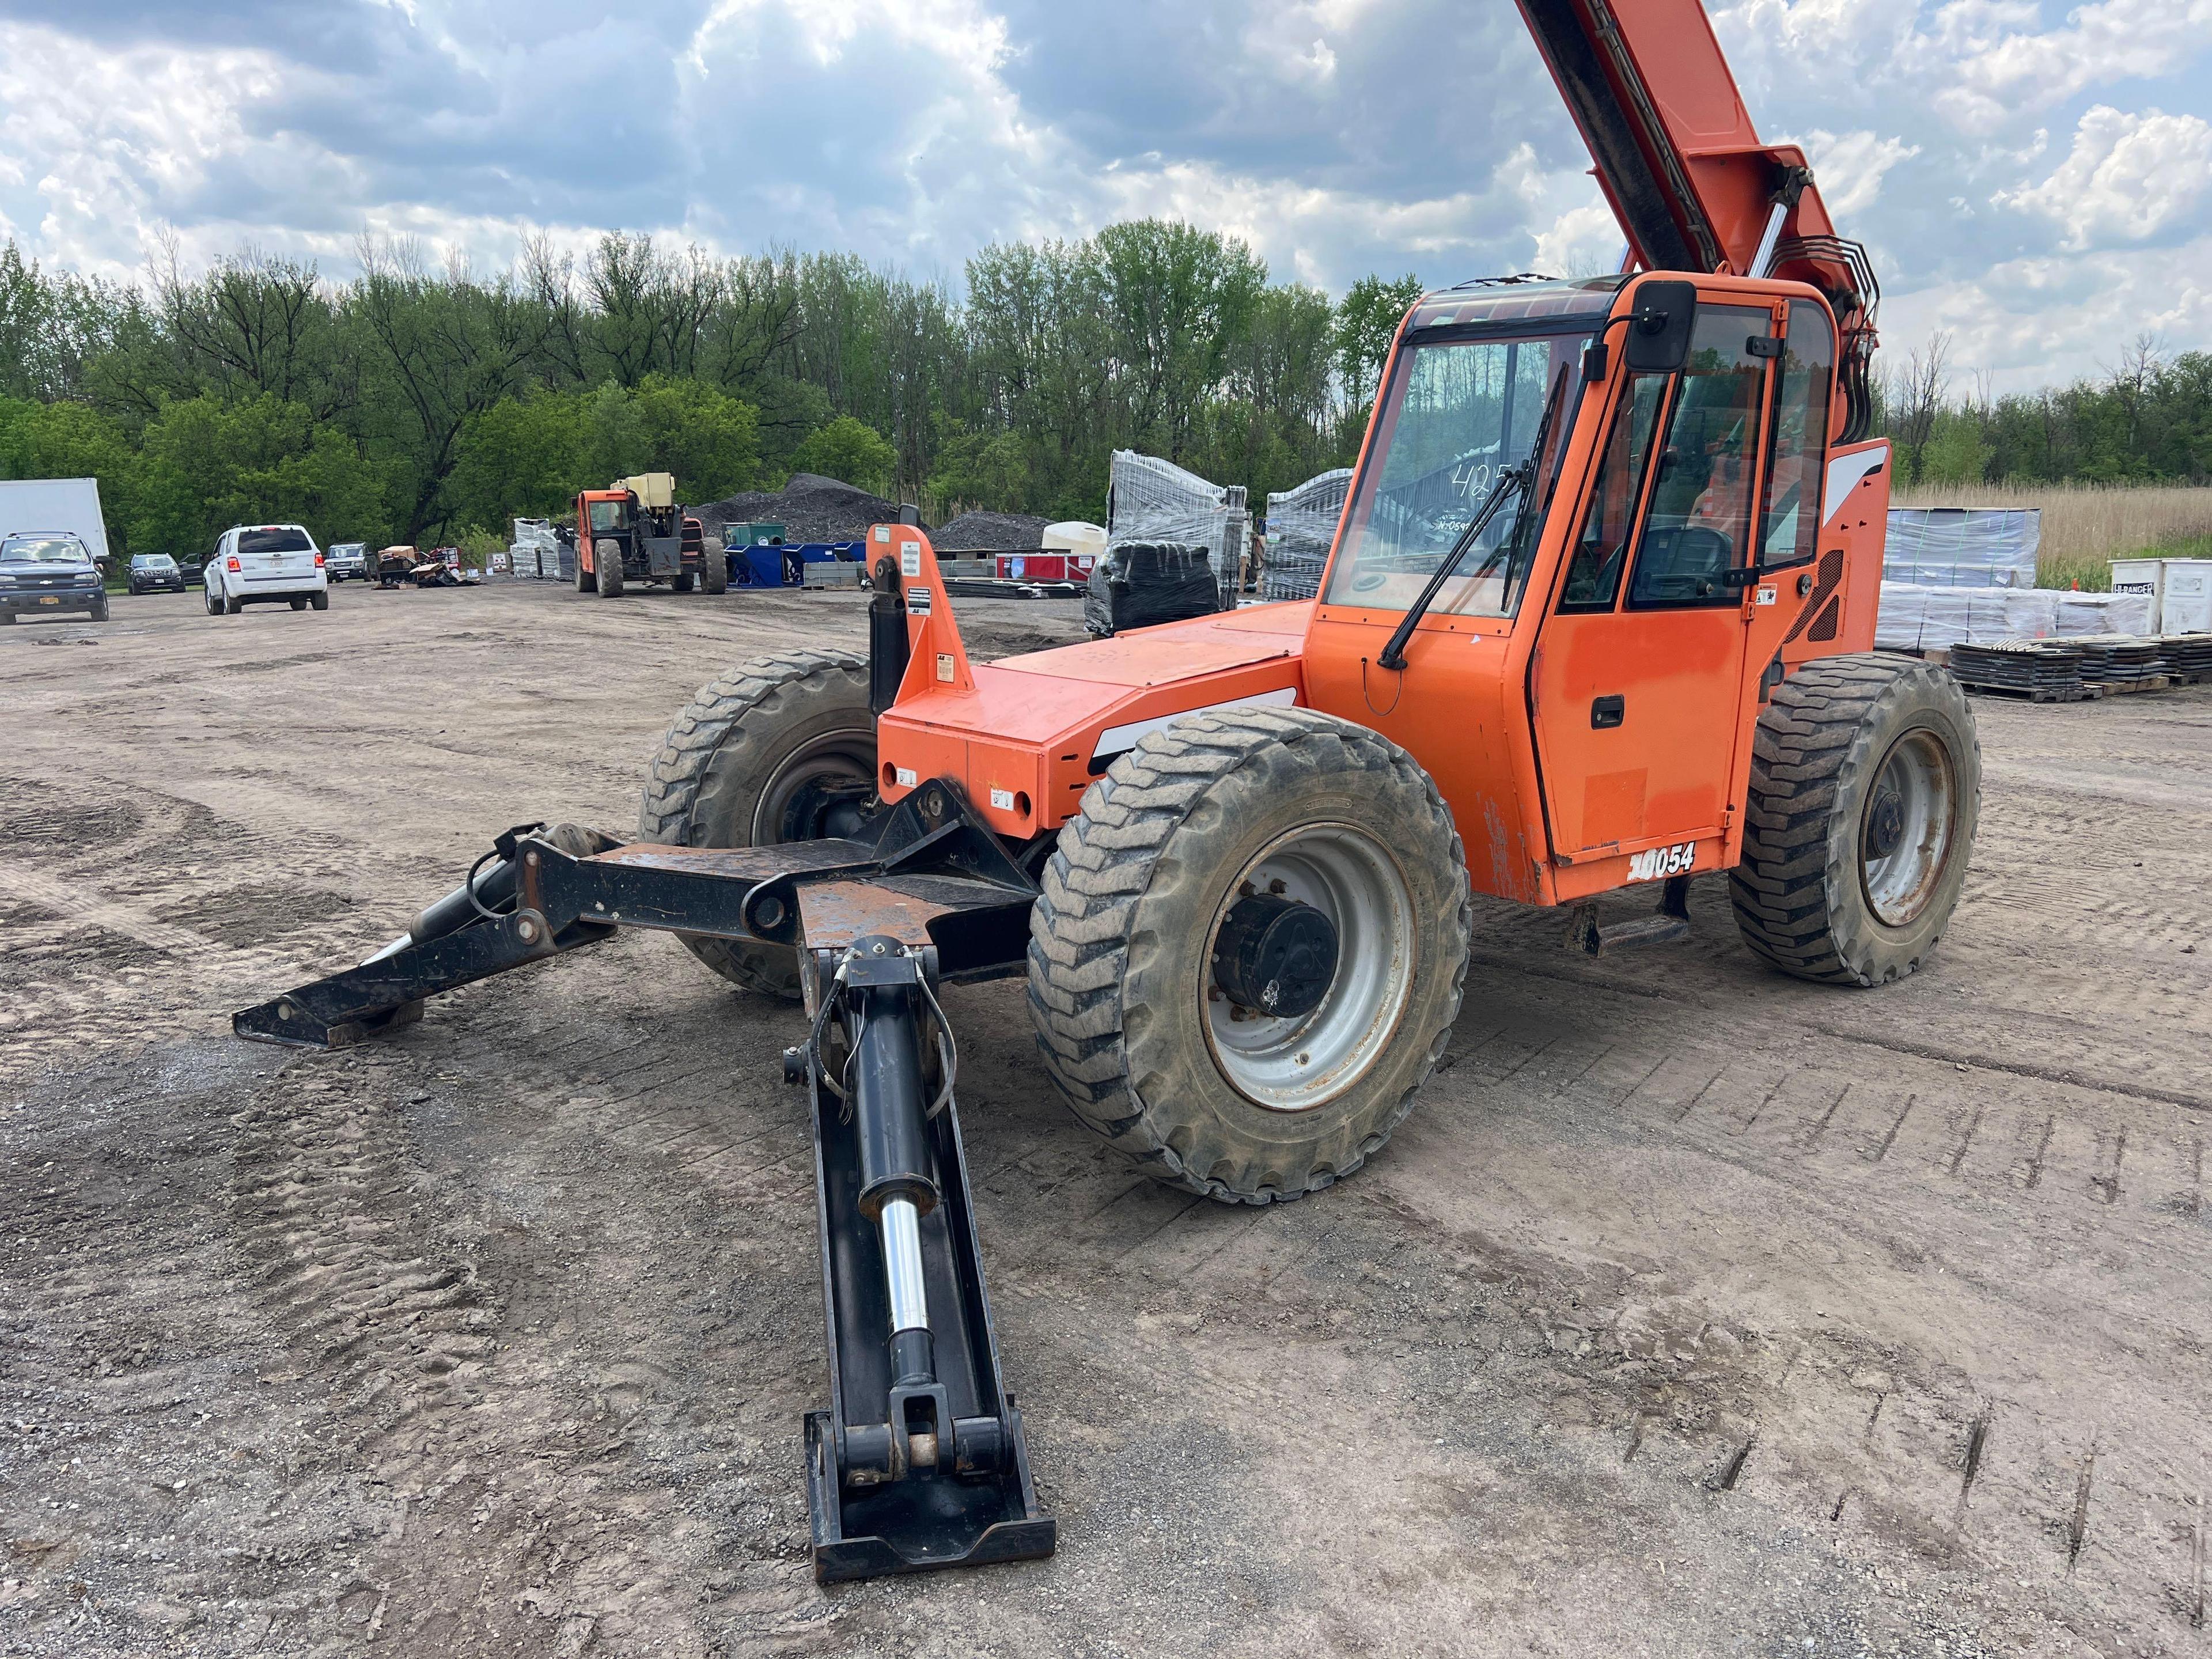 2014 SKYTRAK 10054 TELESCOPIC FORKLIFT SN-059242 4x4, powered by diesel engine, equipped with EROPS,